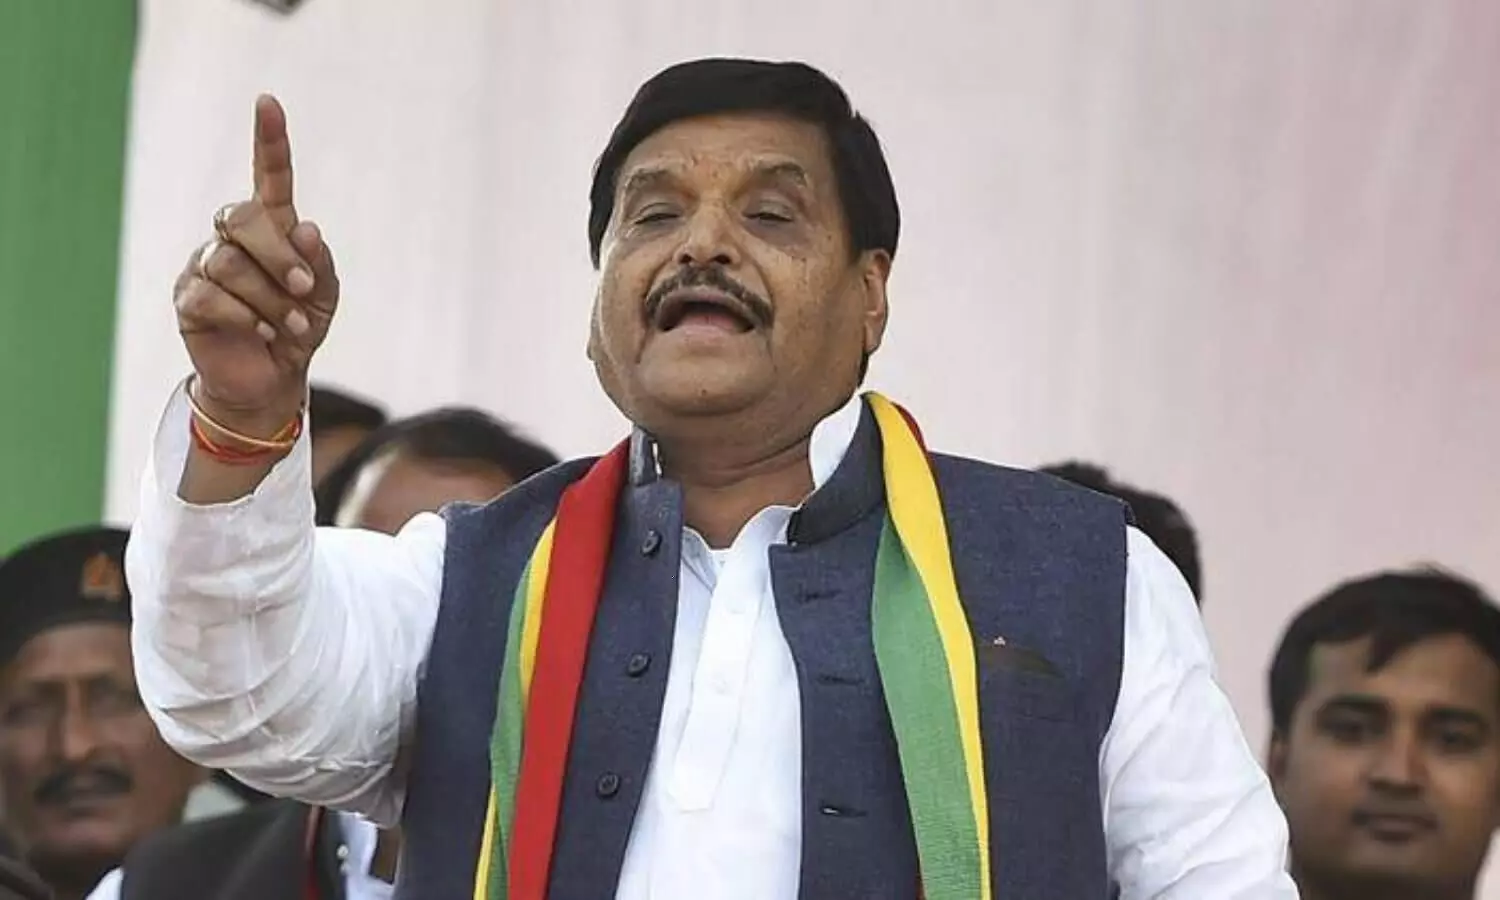 ED sent notice to shivpal yadav in riverfront scam case